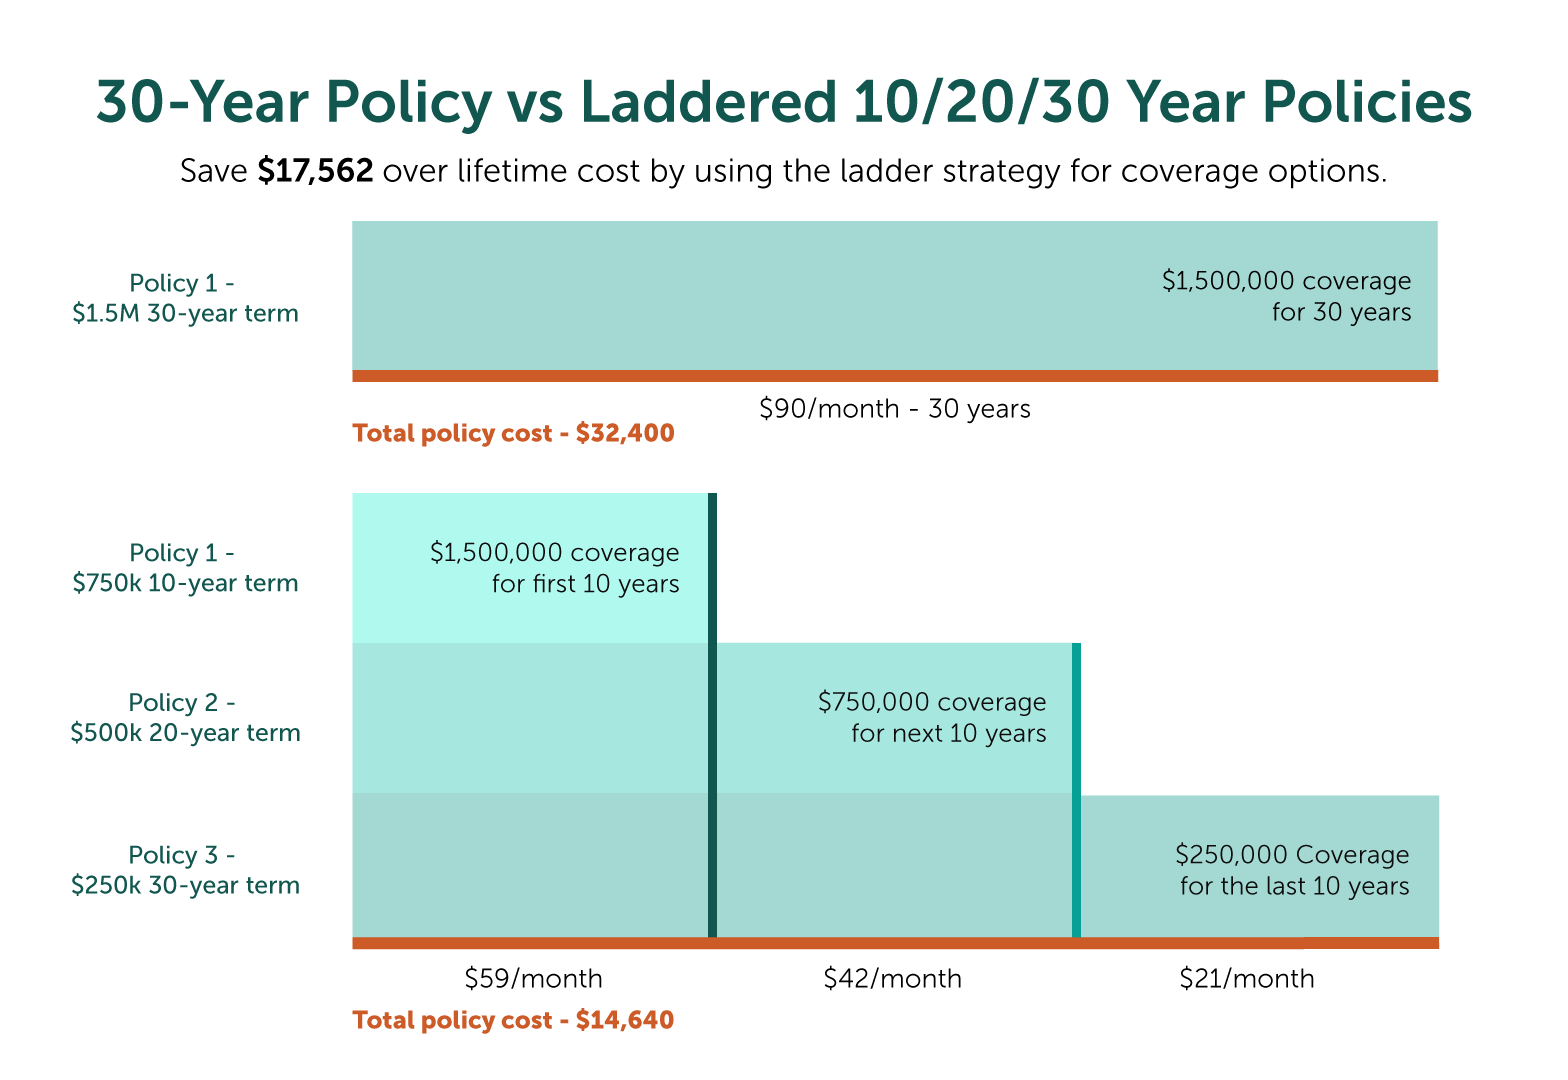 Graphic reads 30-Year Policy vs Laddered 10/20/30 Year Policies. Bar graph illustrates the savings of $17,562 dollars using one 30-year policy versus 3 policies laddered with 10-year, 20-year, and 30-year. The 30-year policy is $90 per month for 30 years for a total cost of $32,000. The laddered policies show a $750,000 10-year, a $500,000 20-year policy, and a $250,000 30-year. The total cost is $14,640.